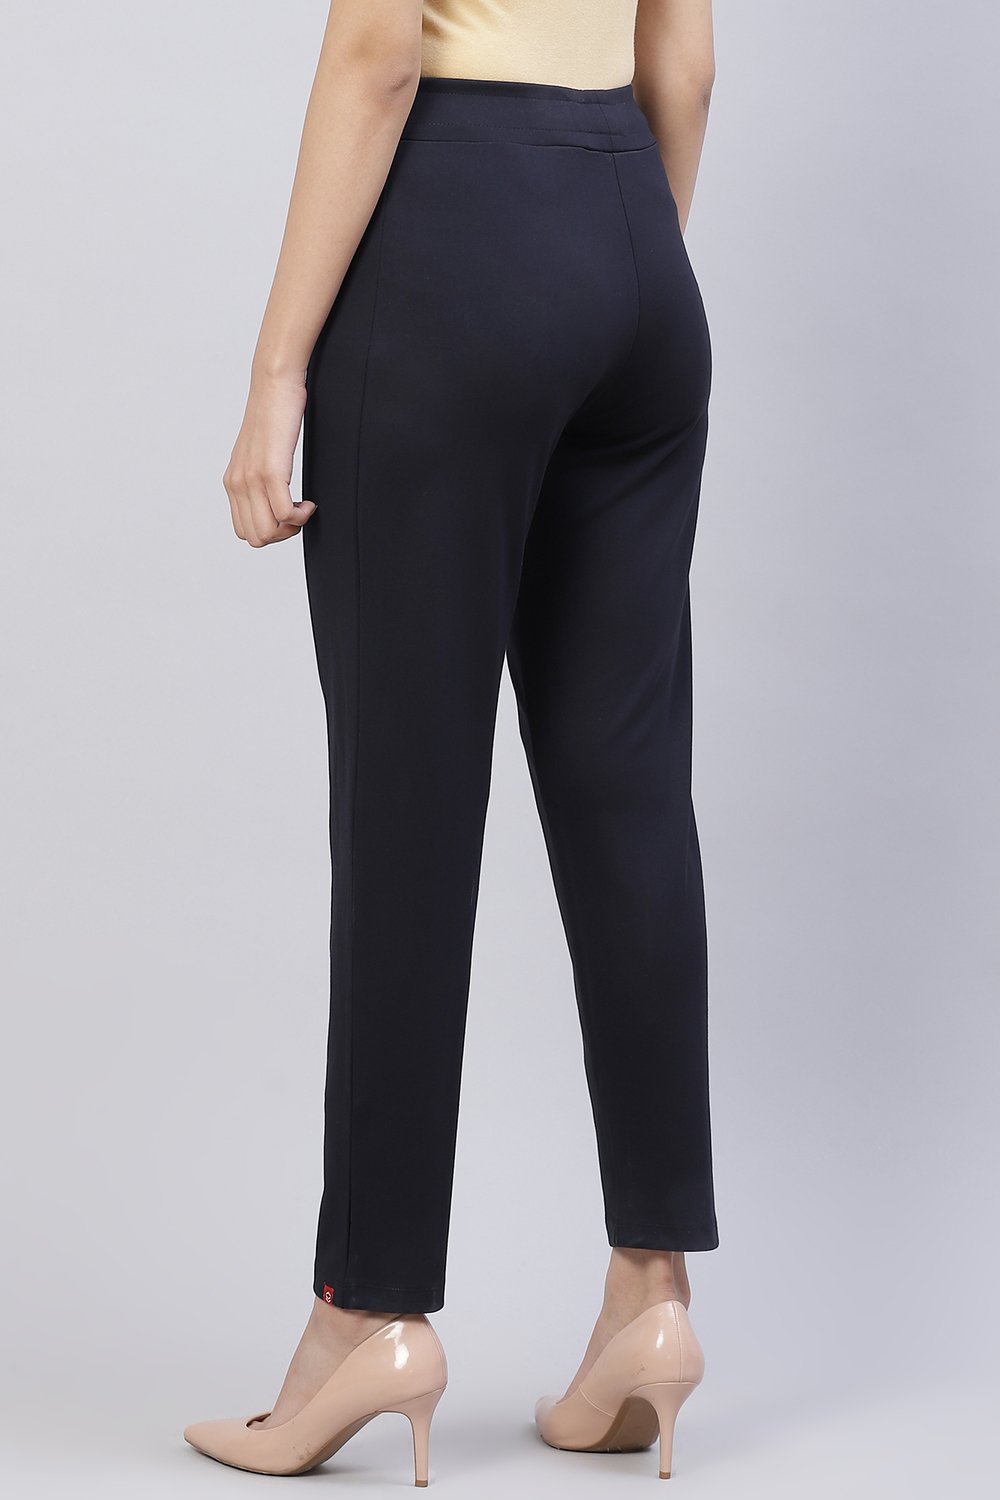 Towny Port Straight Poly Viscose Leggings image number 4